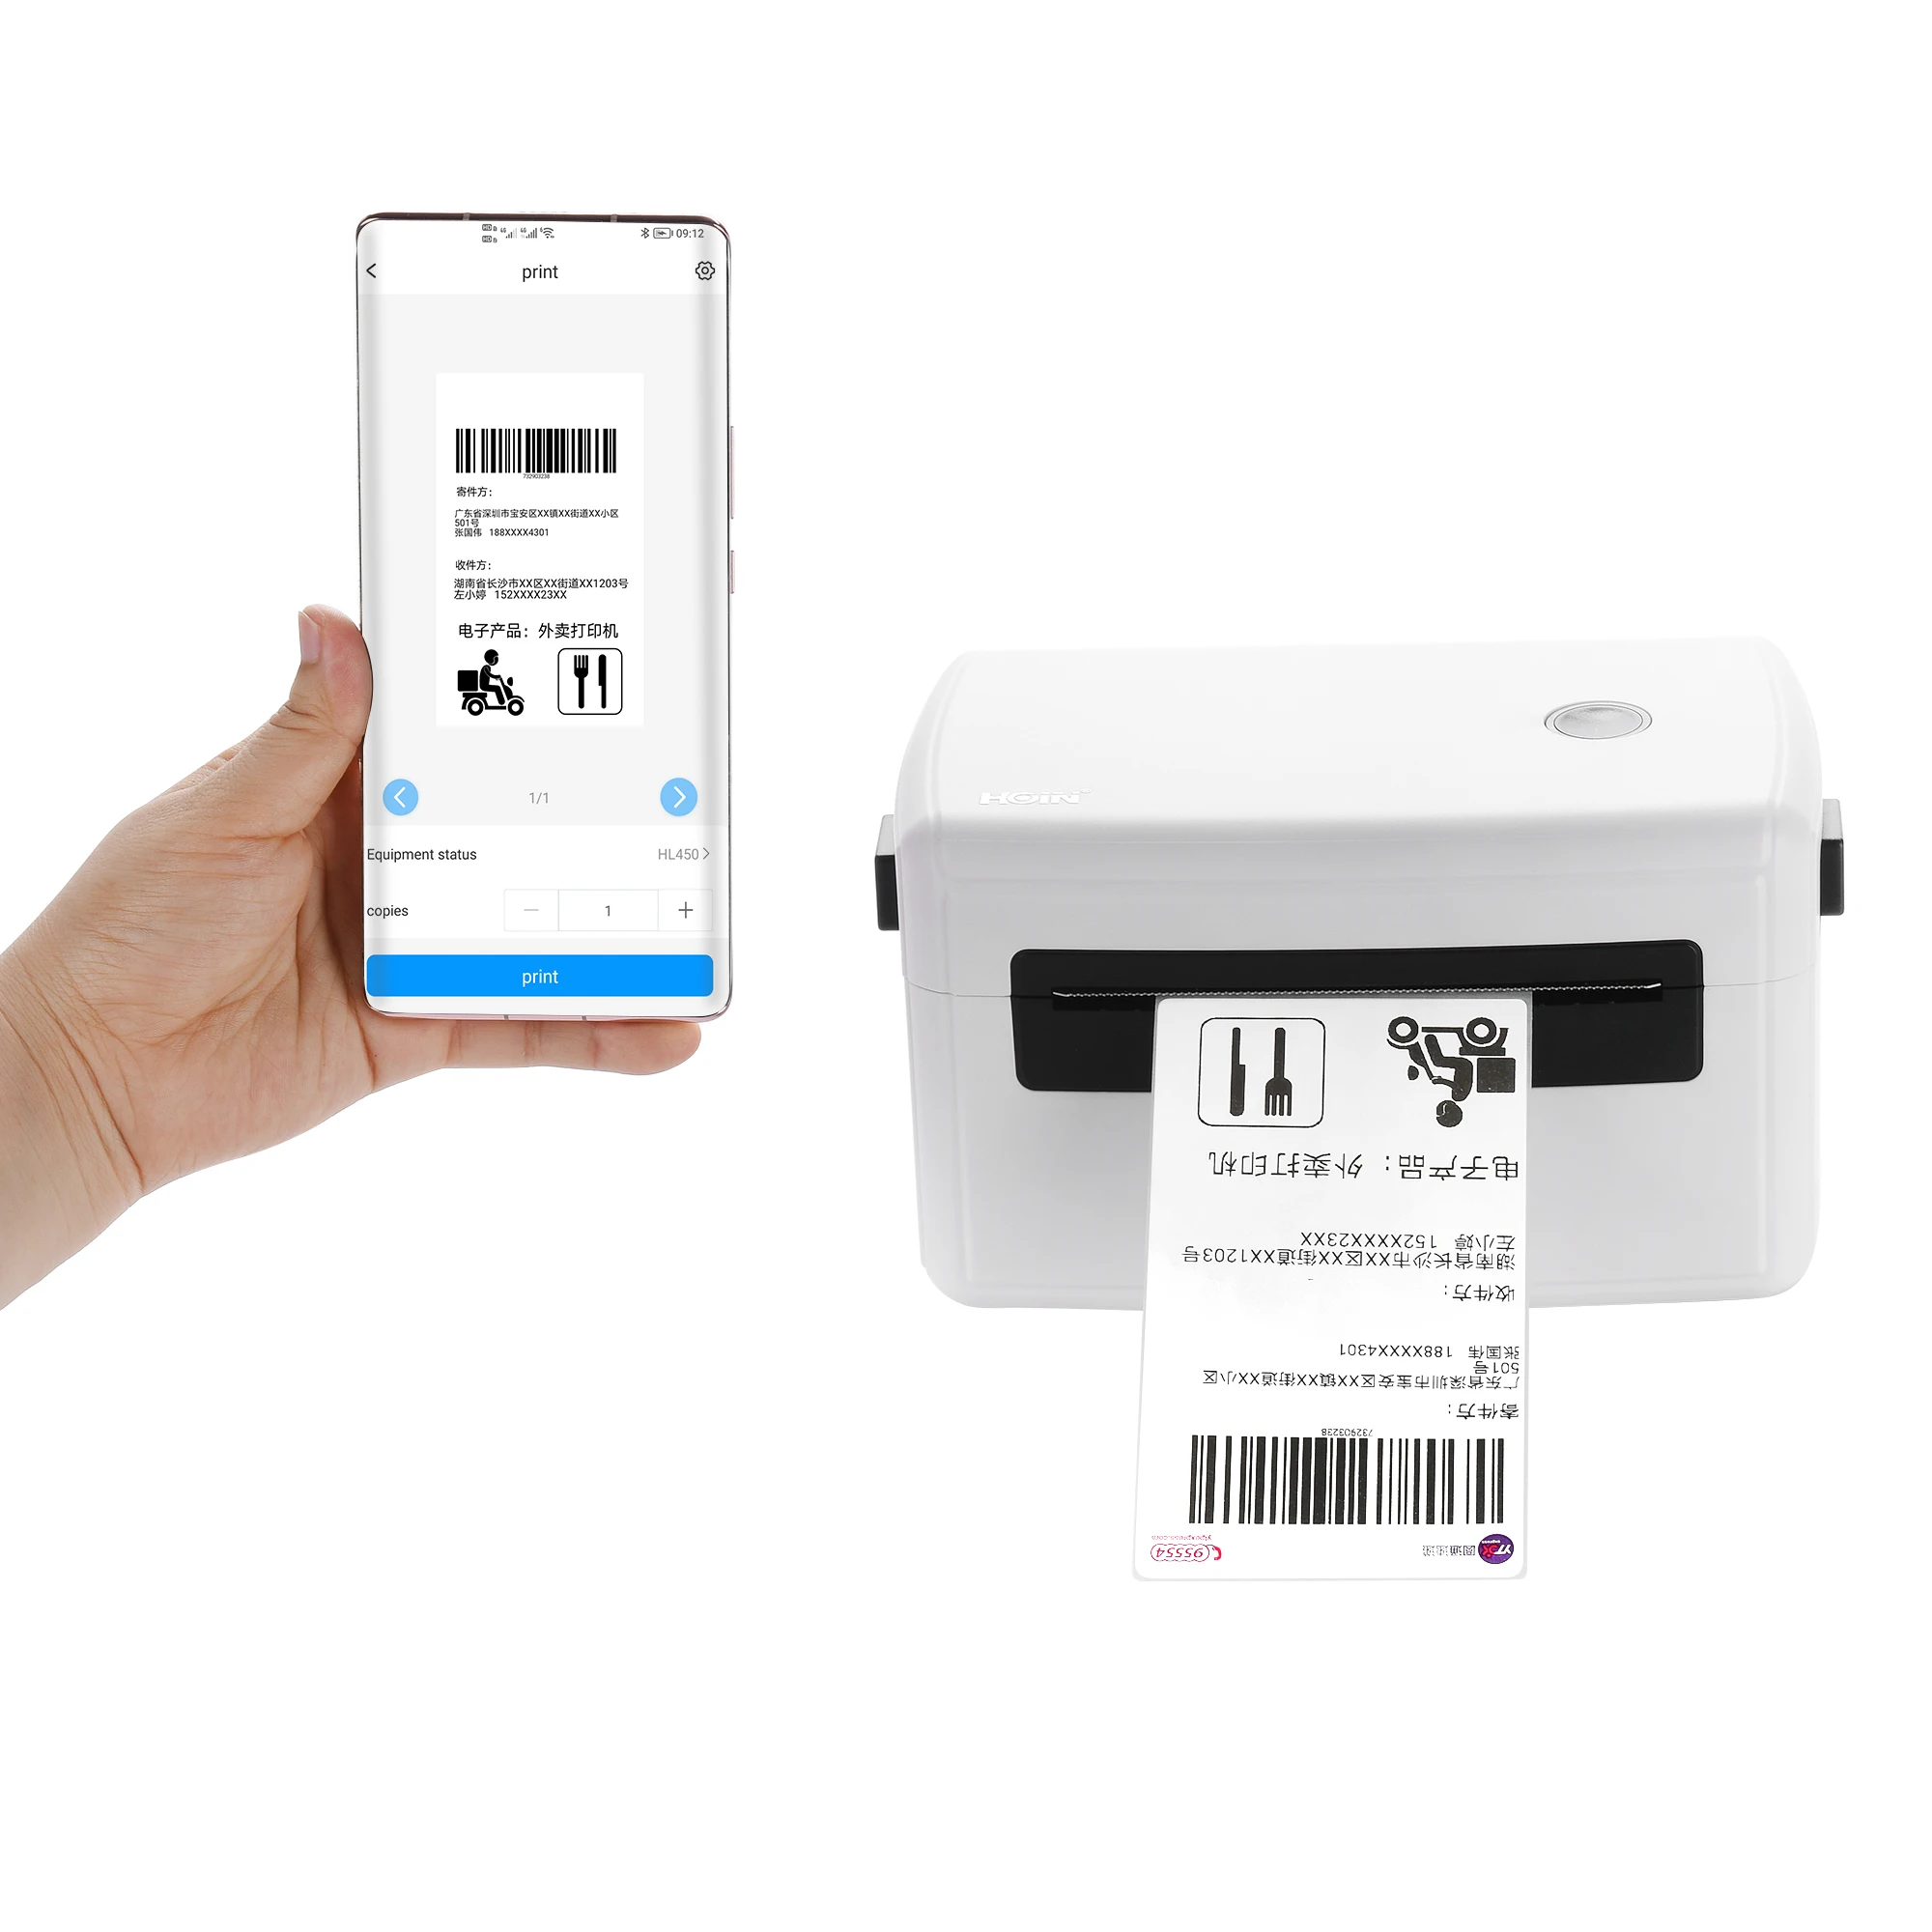 4x6 Direct Thermal Label barcode Printer label printer roll Inkless Printing for Shipping Bills, Stickers, Images, Tags